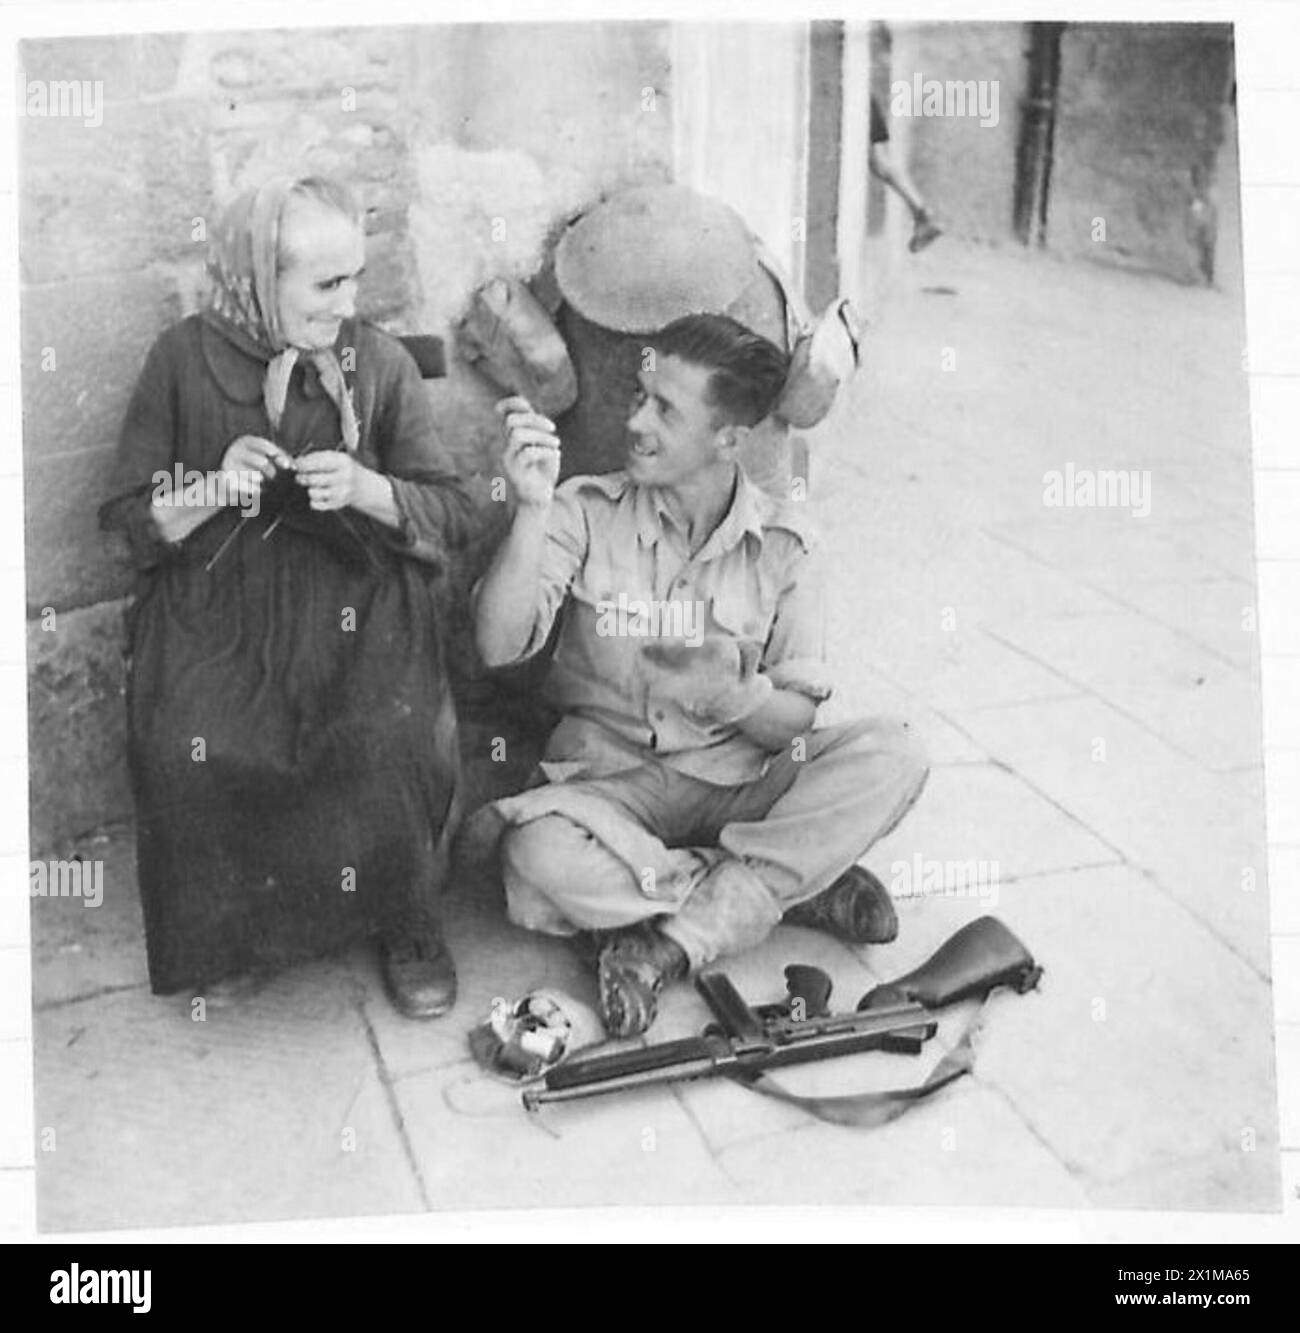 EIGHTH ARMY : VARIOUS - Rfn. Brighthouse of Preston makes friends with an old Italian woman while making some necessary running repairs, British Army Stock Photo